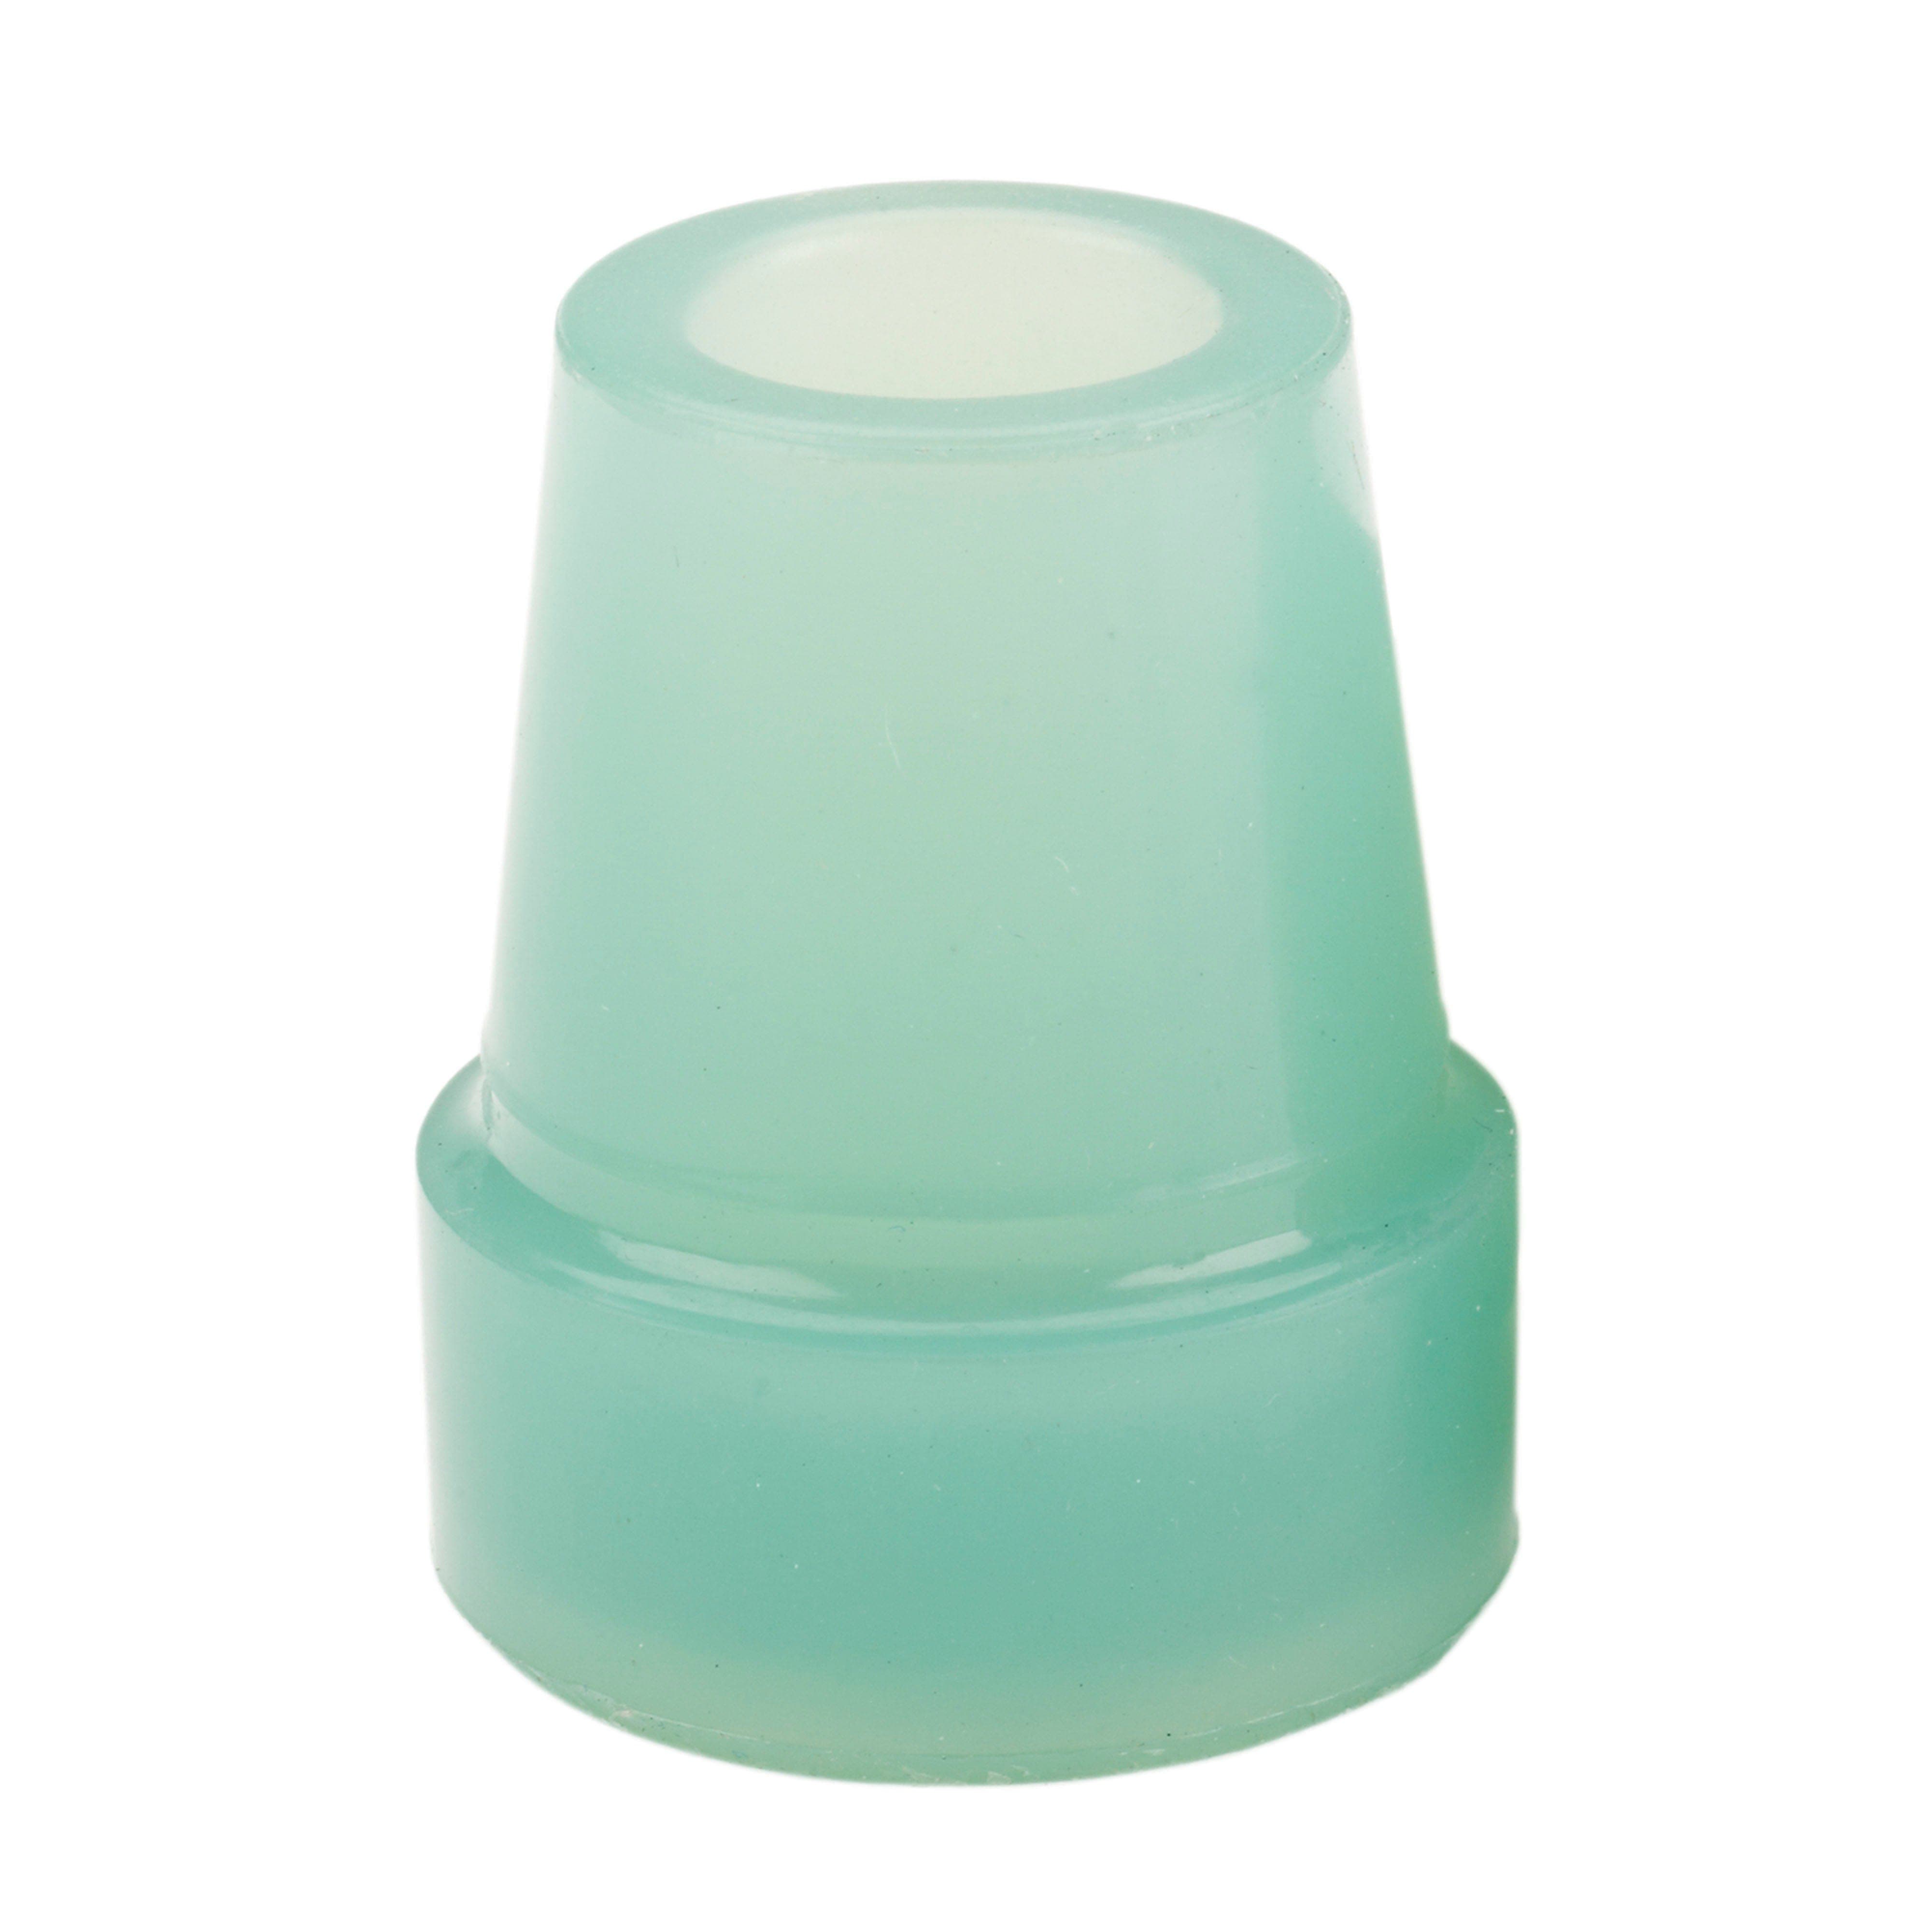 Drive Medical Drive Medical Glow In The Dark Cane Tip, 3/4" rtl10324bb